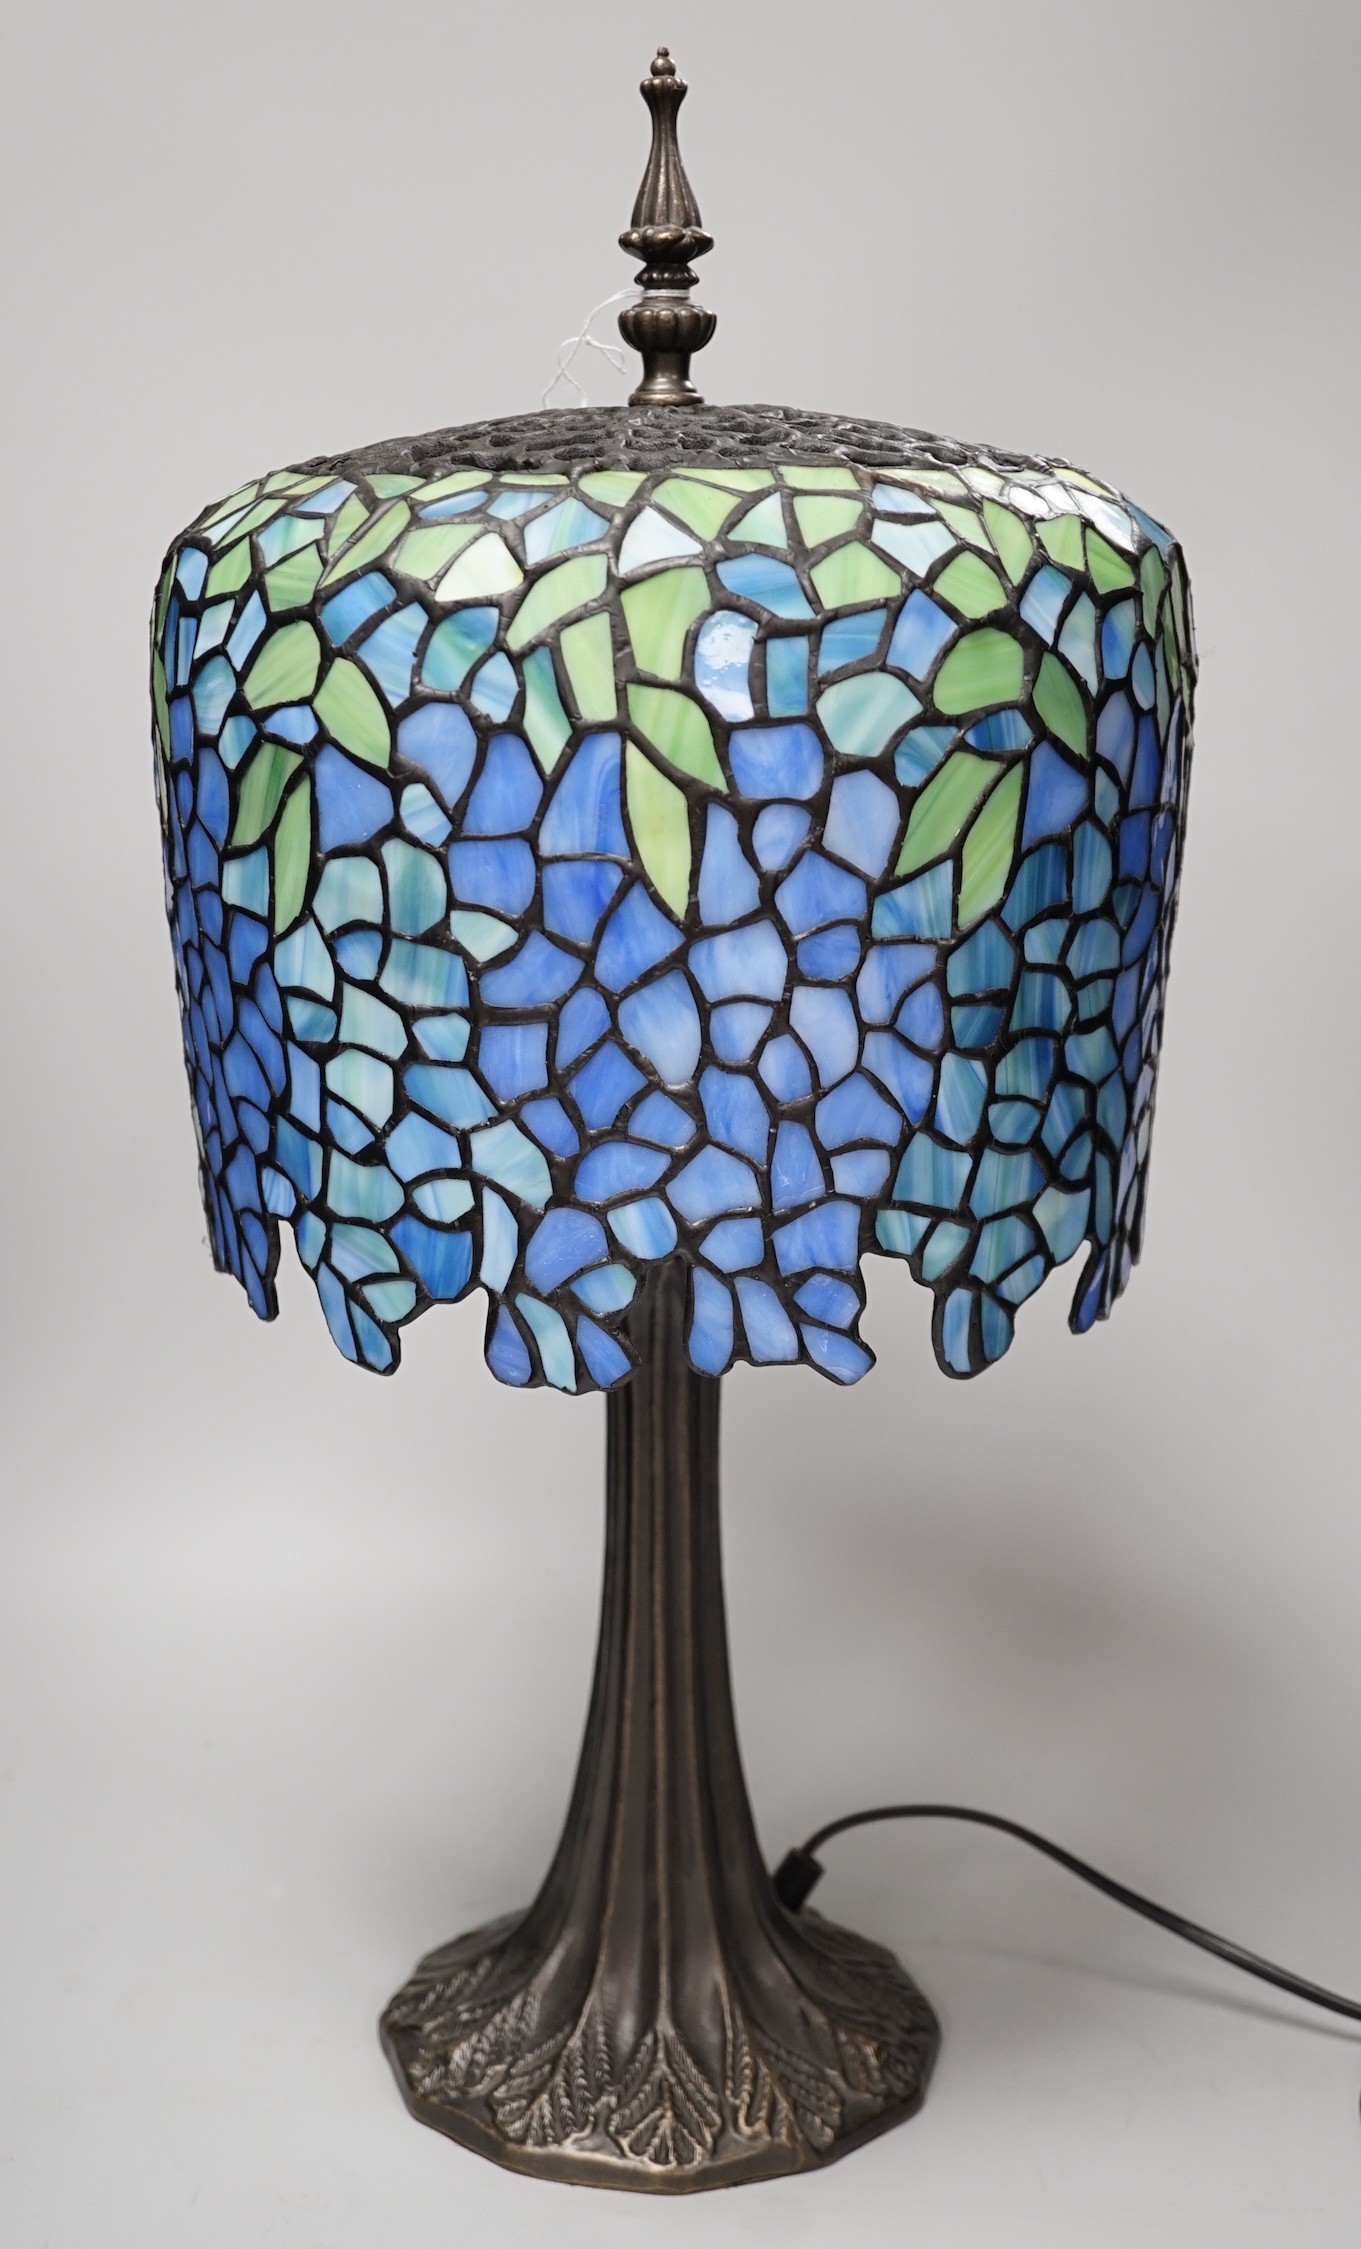 A Tiffany style stained glass lamp. 54cm tall